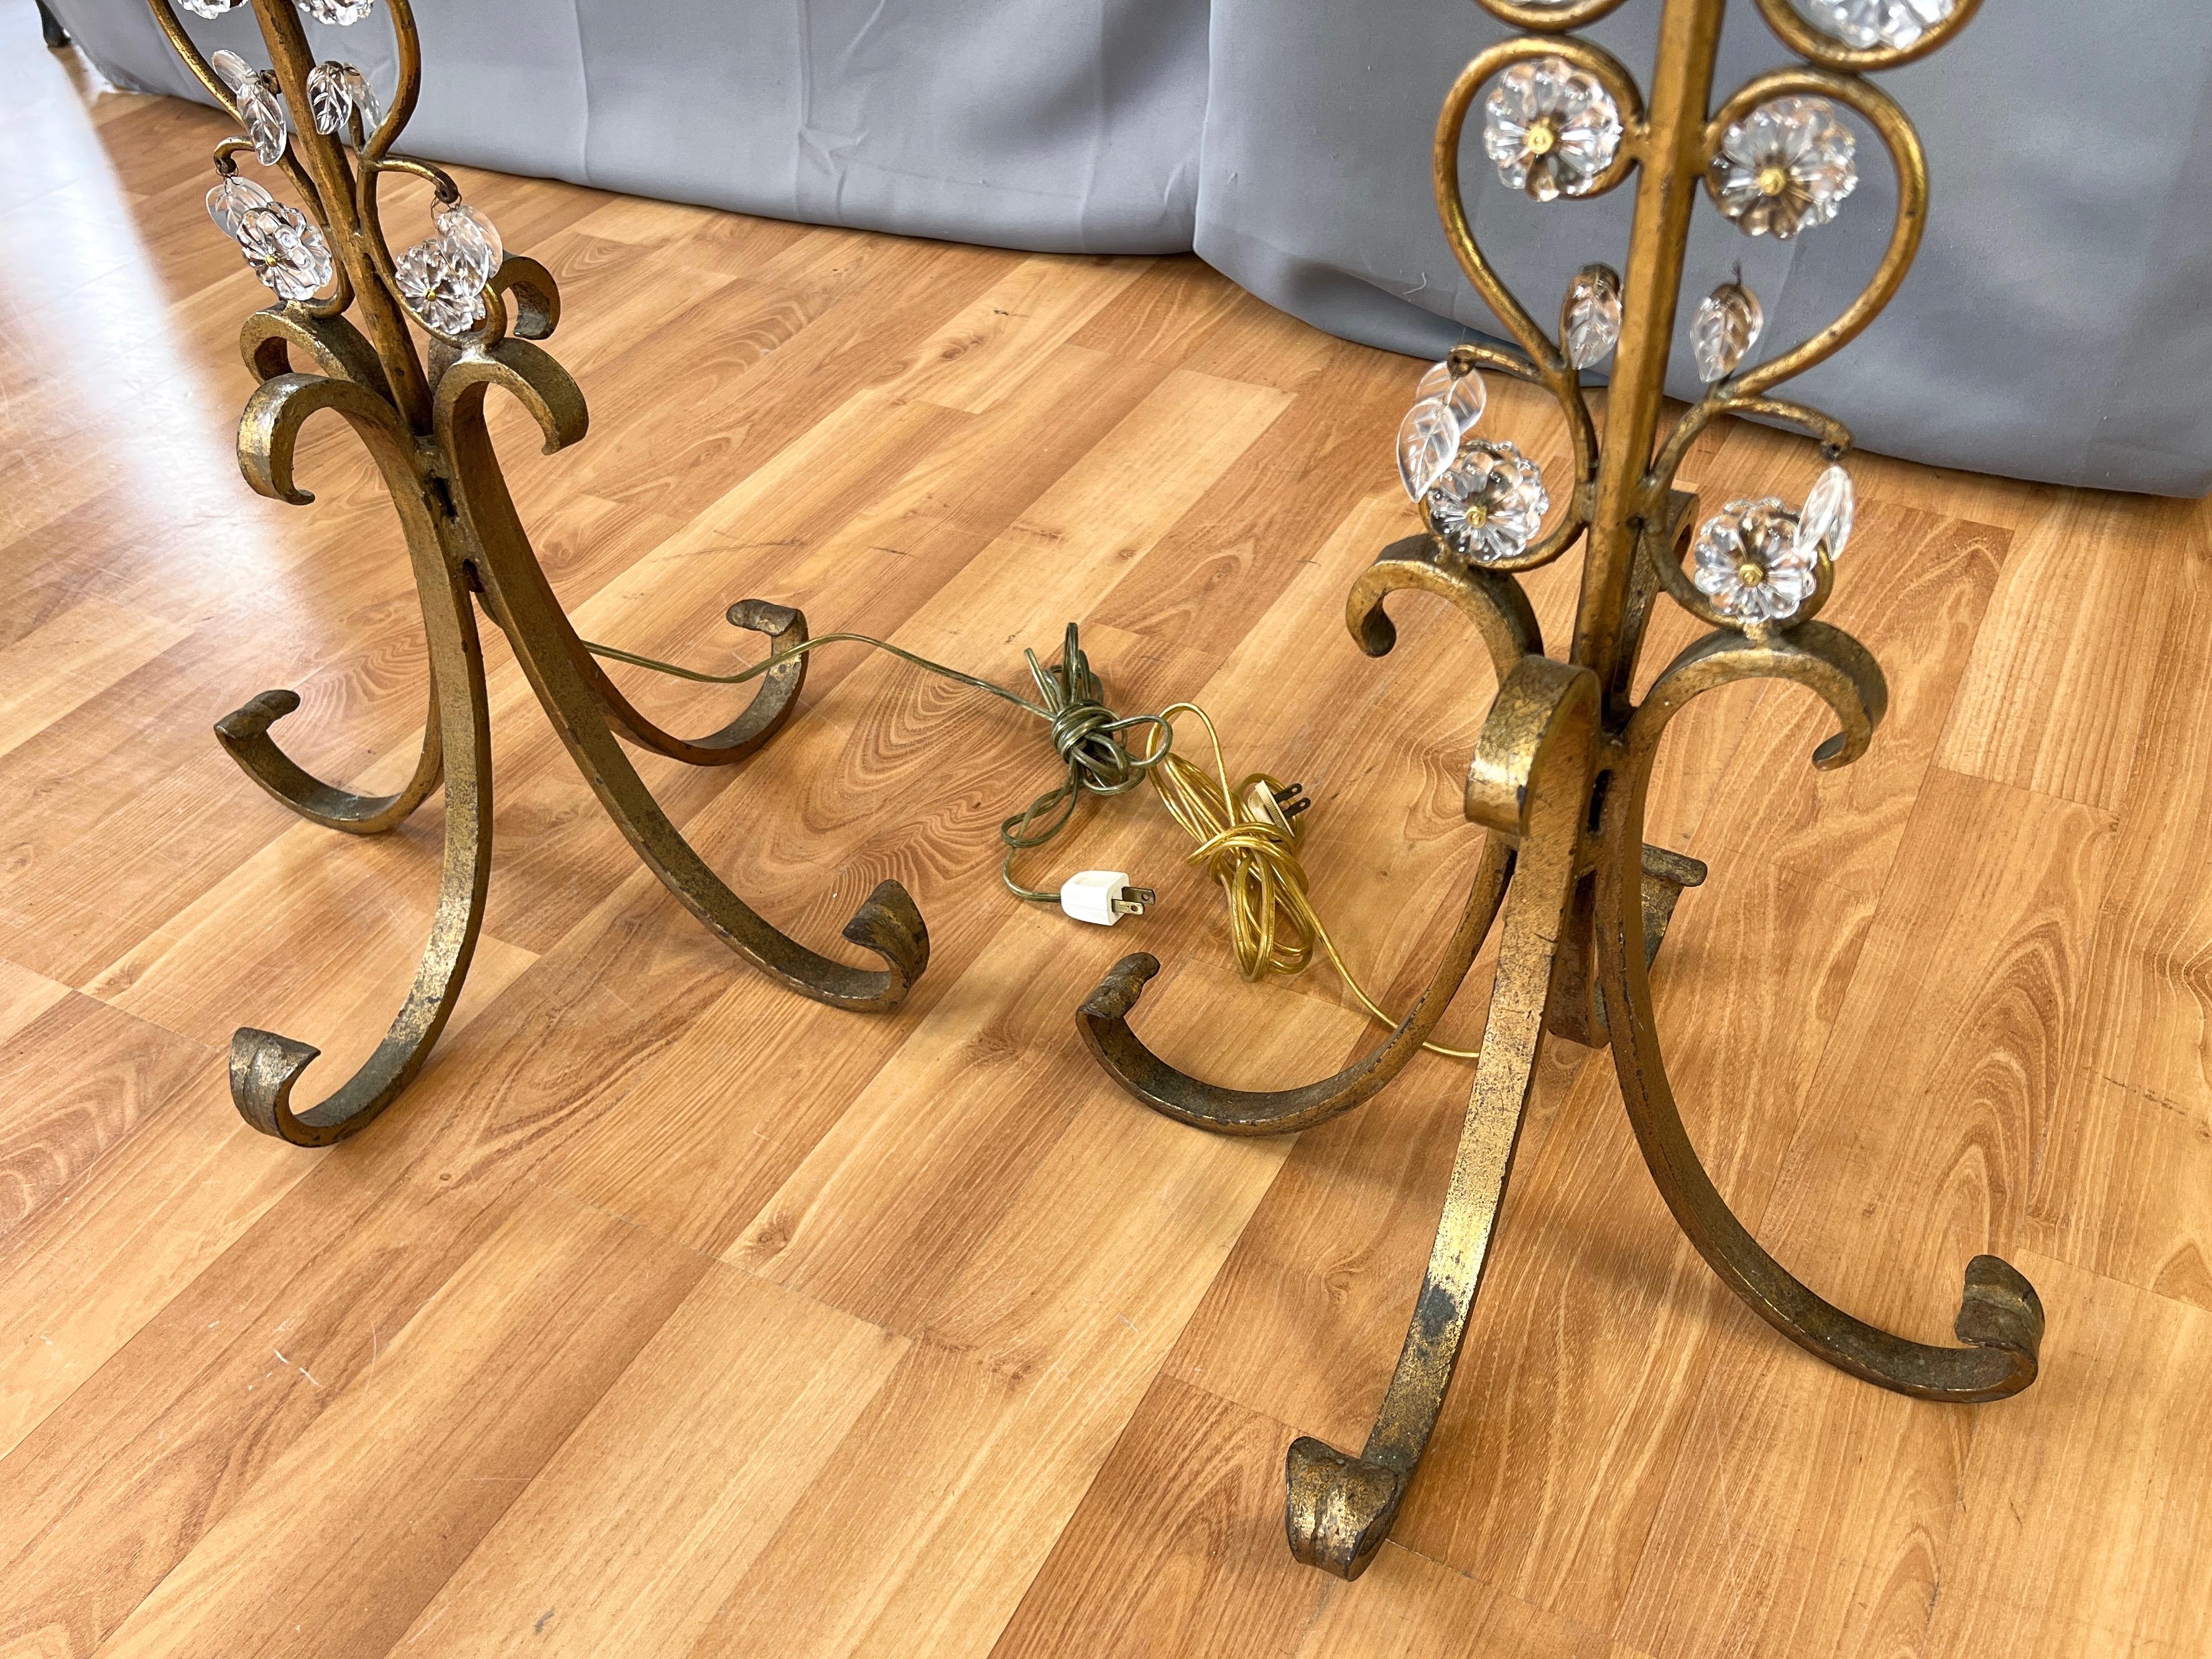 Pair of Italian Gilt Wrought Iron Floor Lamps with Glass Florets & Leaves, 1950s For Sale 14